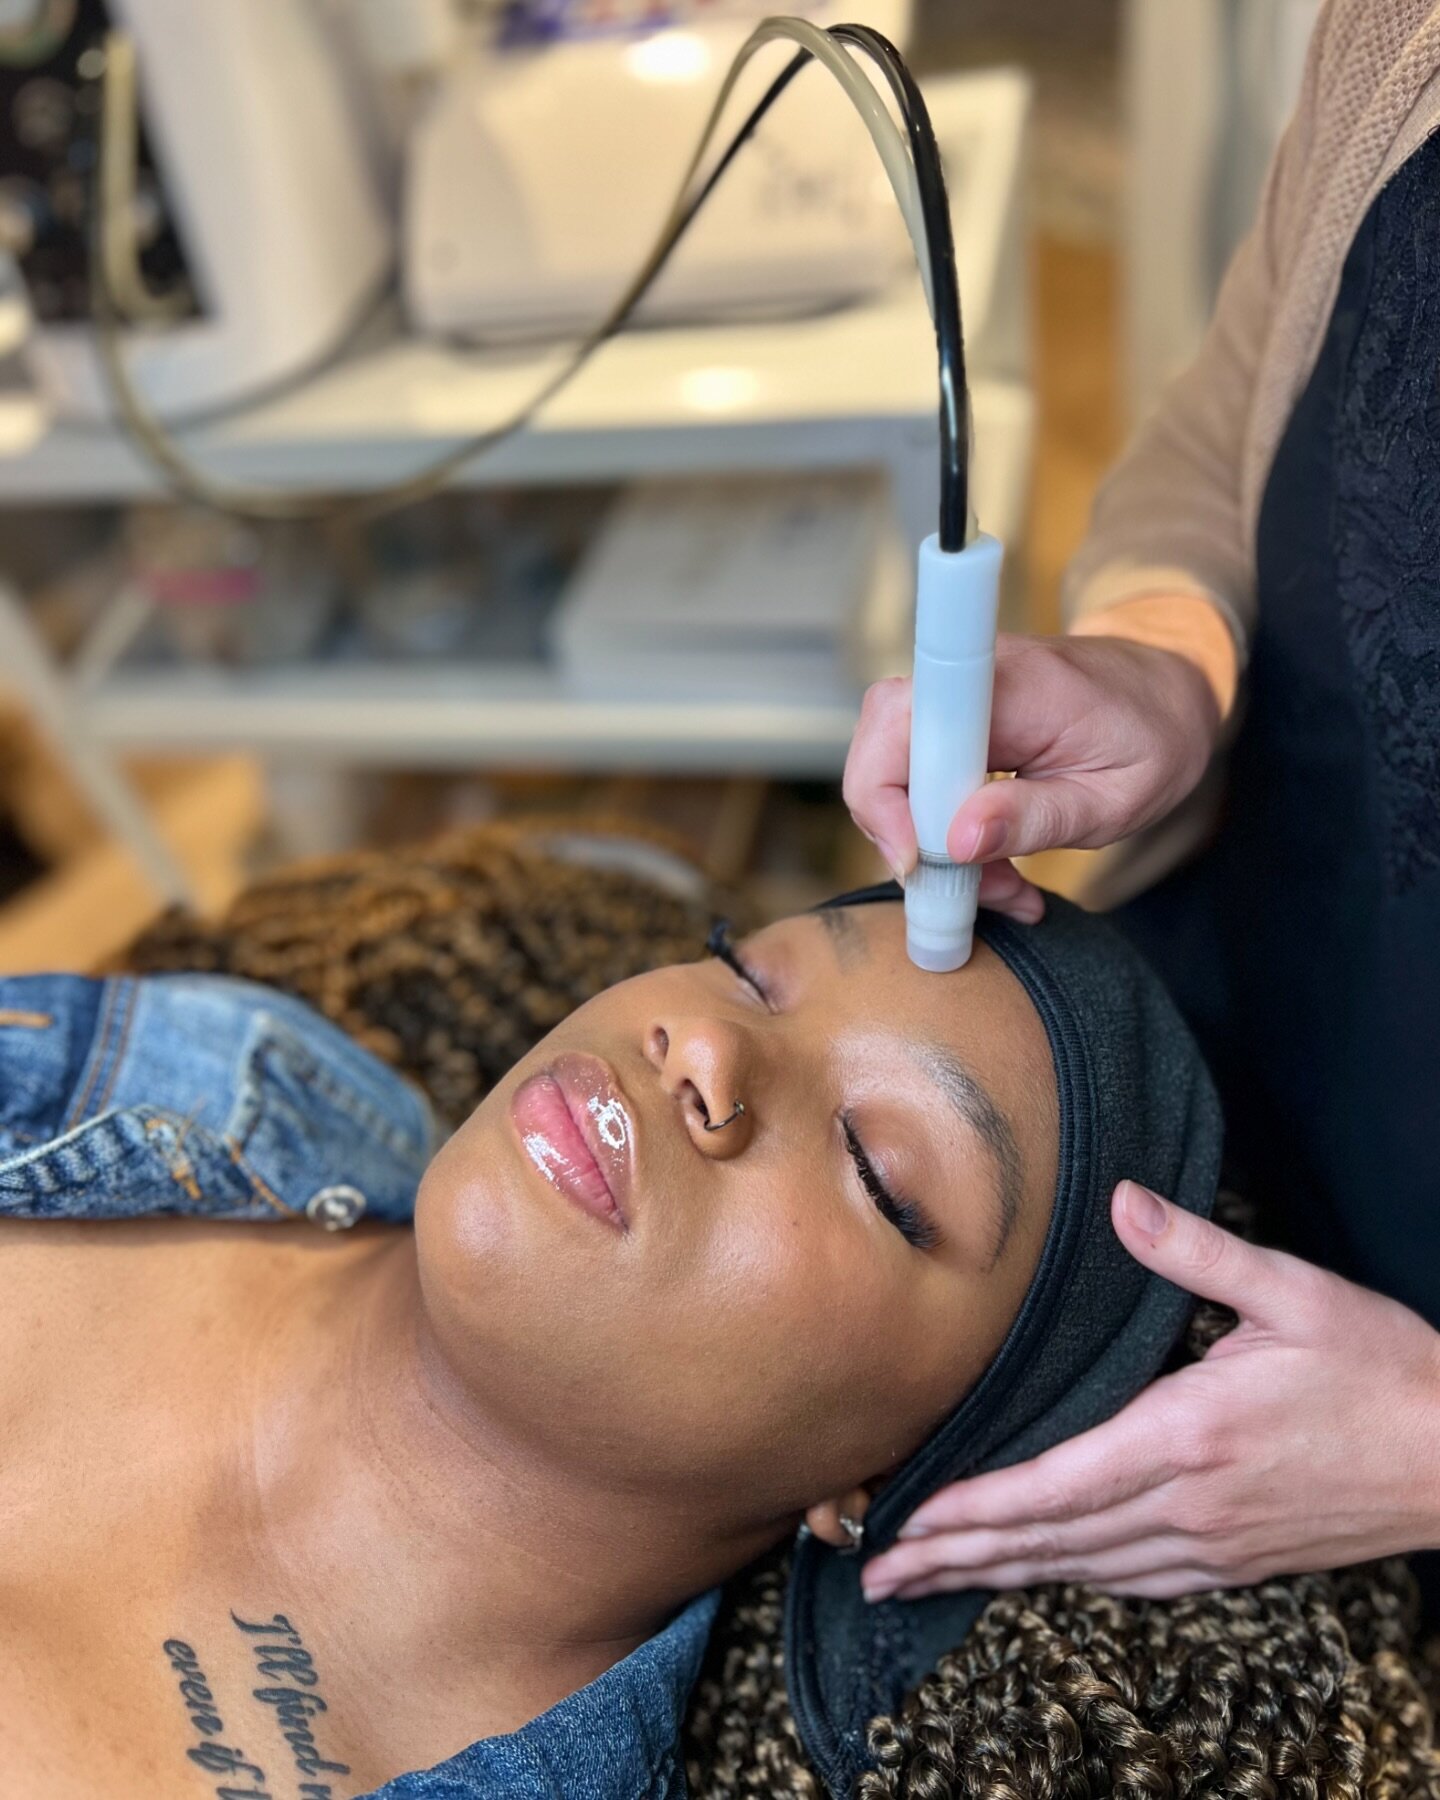 ✨Microderm Monday Special✨

Say goodbye to dull winter skin and hello to a fresh, glowing complexion with our &ldquo;On the Go Glow&rdquo; Microderm &amp; light peel service! This quick (30-45 minute) and effective exfoliation treatment will leave yo